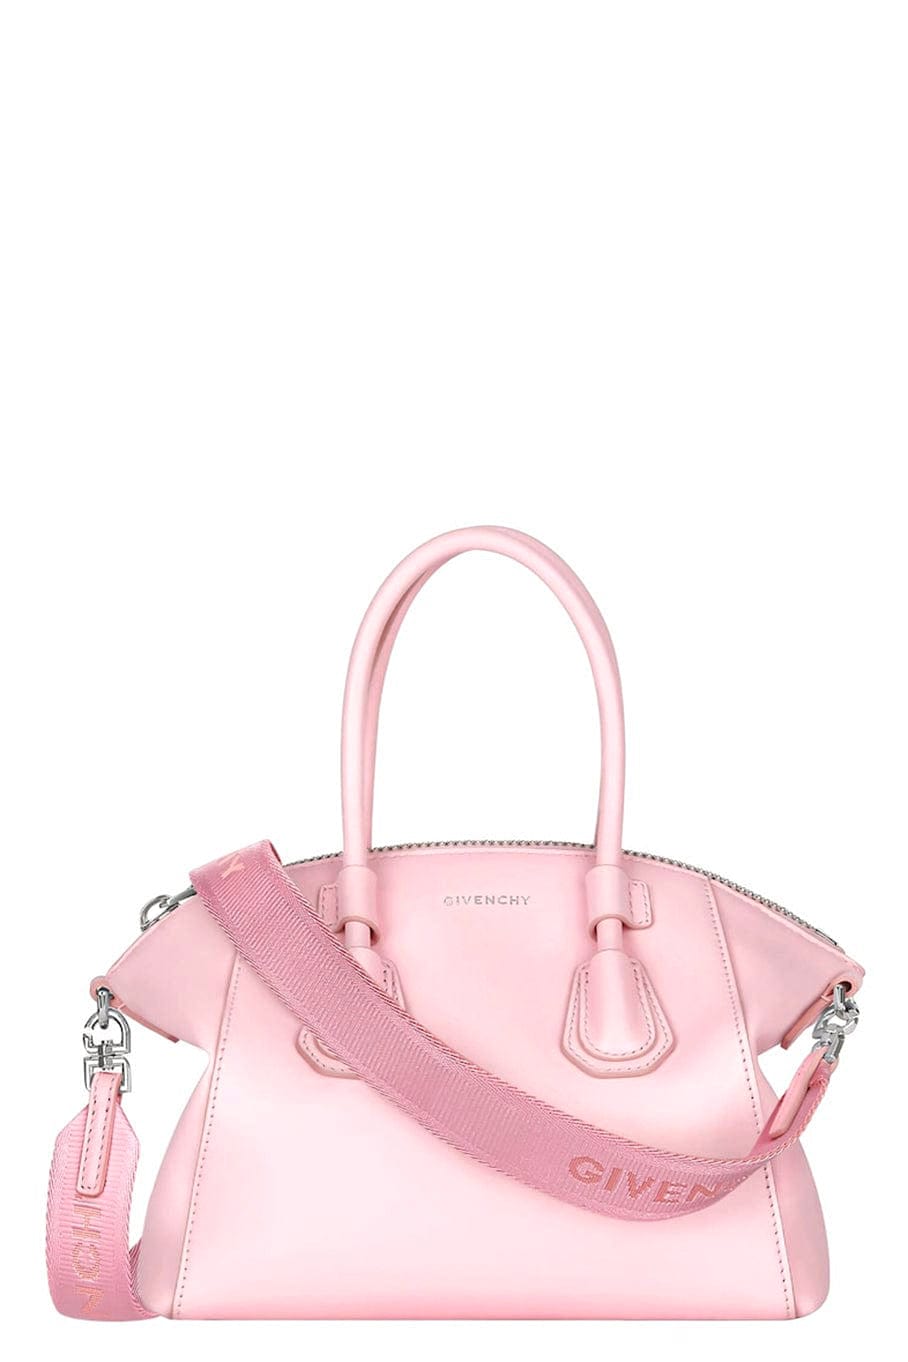 Givenchy Antigona Sport Mini Leather Top Handle Bag in Blossom Pink